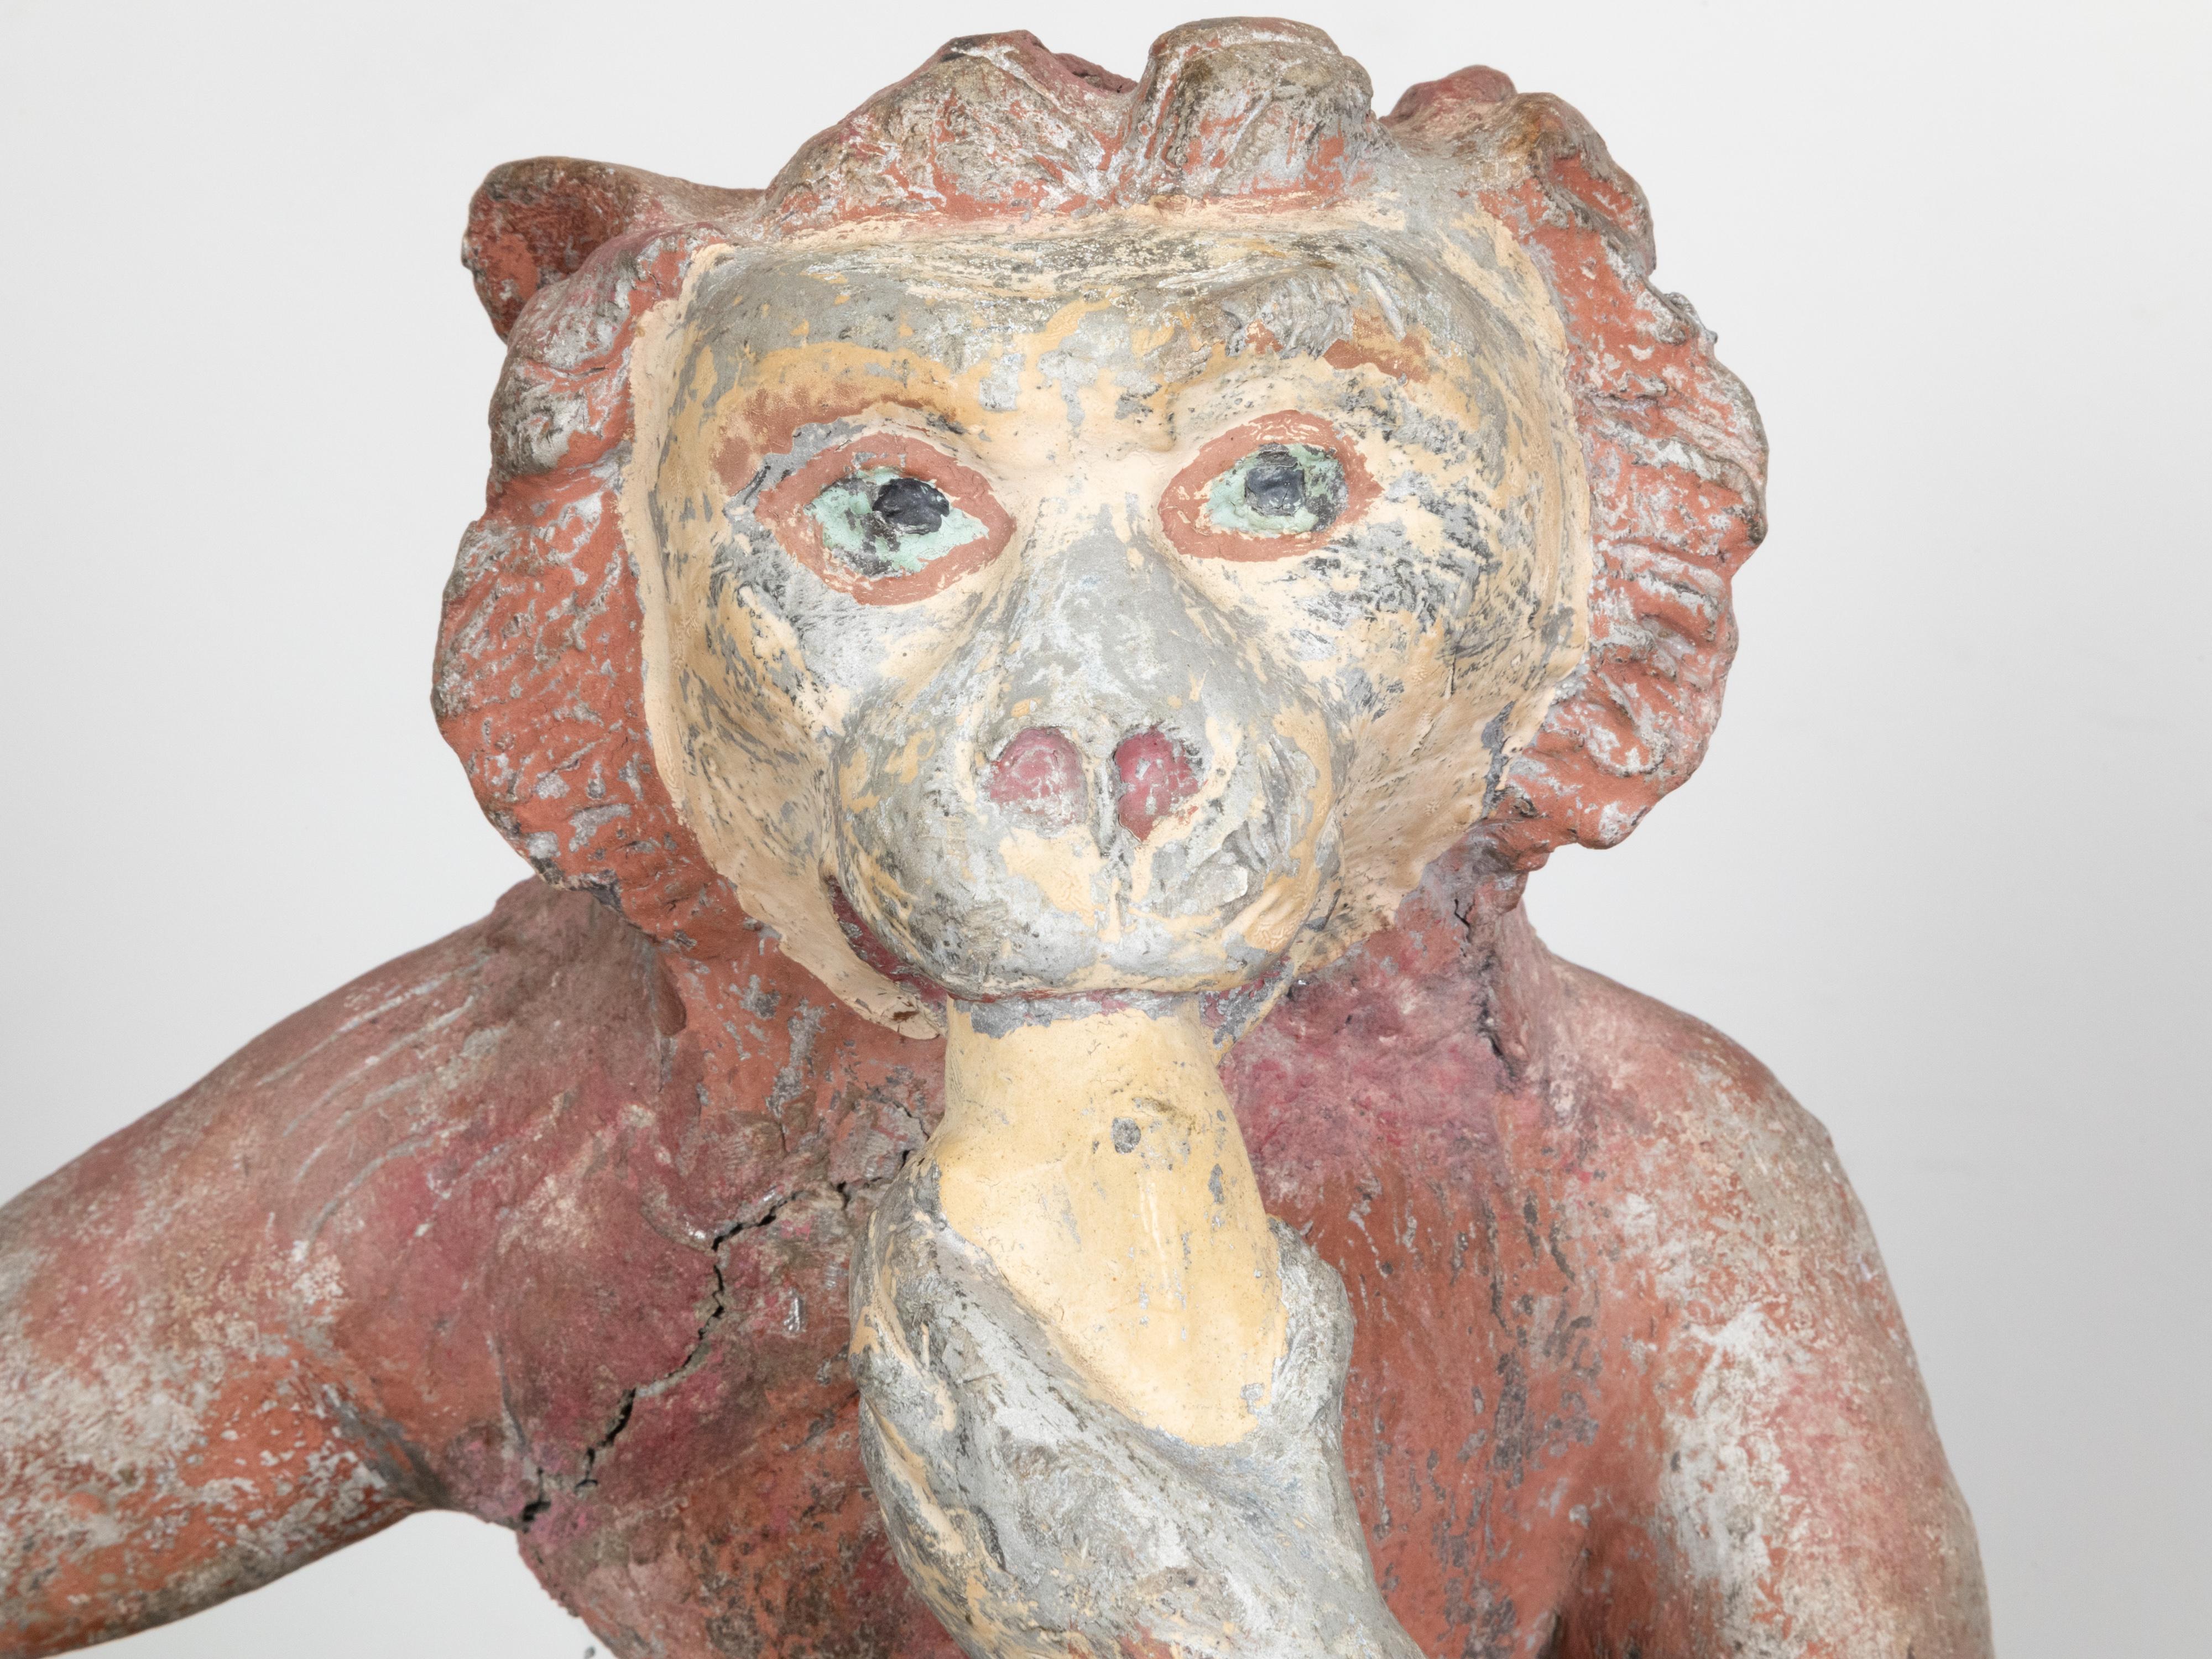 French Midcentury Lead Sculpture of a Monkey Eating a Banana with Aged Patina For Sale 3